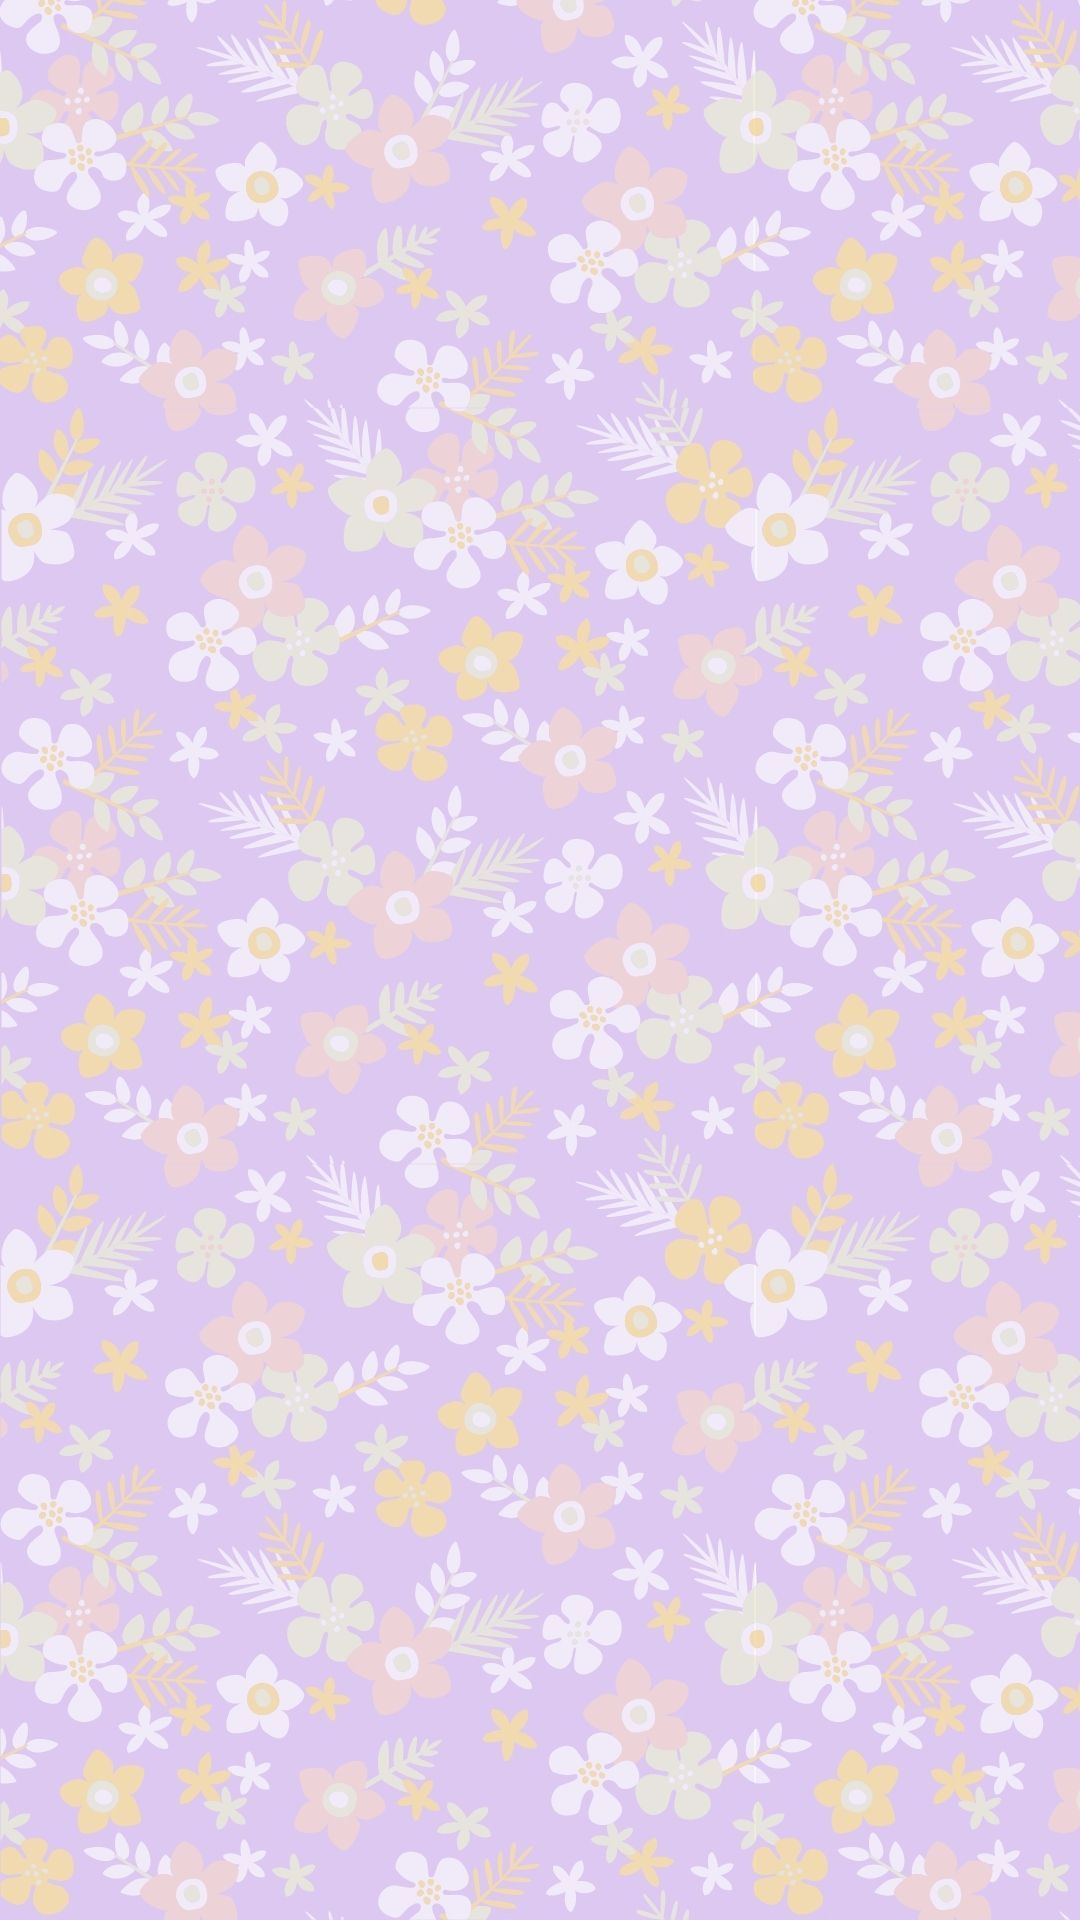 A purple background with white flowers and yellow leaves - Easter